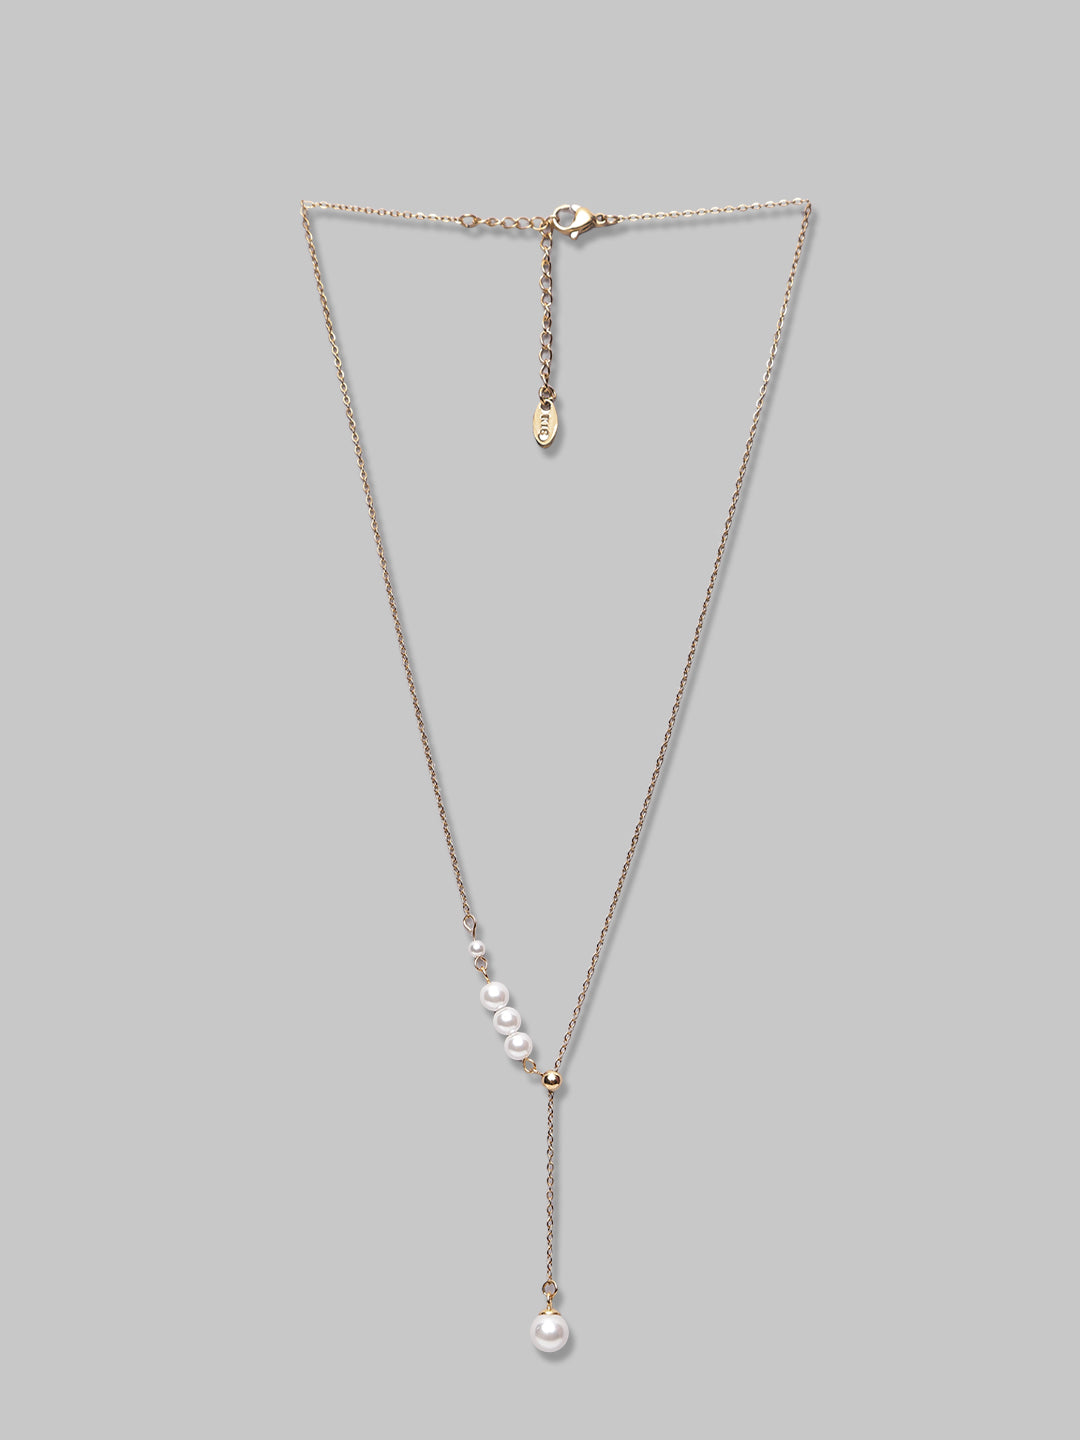 Gold Plated And Latest White Pearl Design Lightweight Chain For Women And Girls